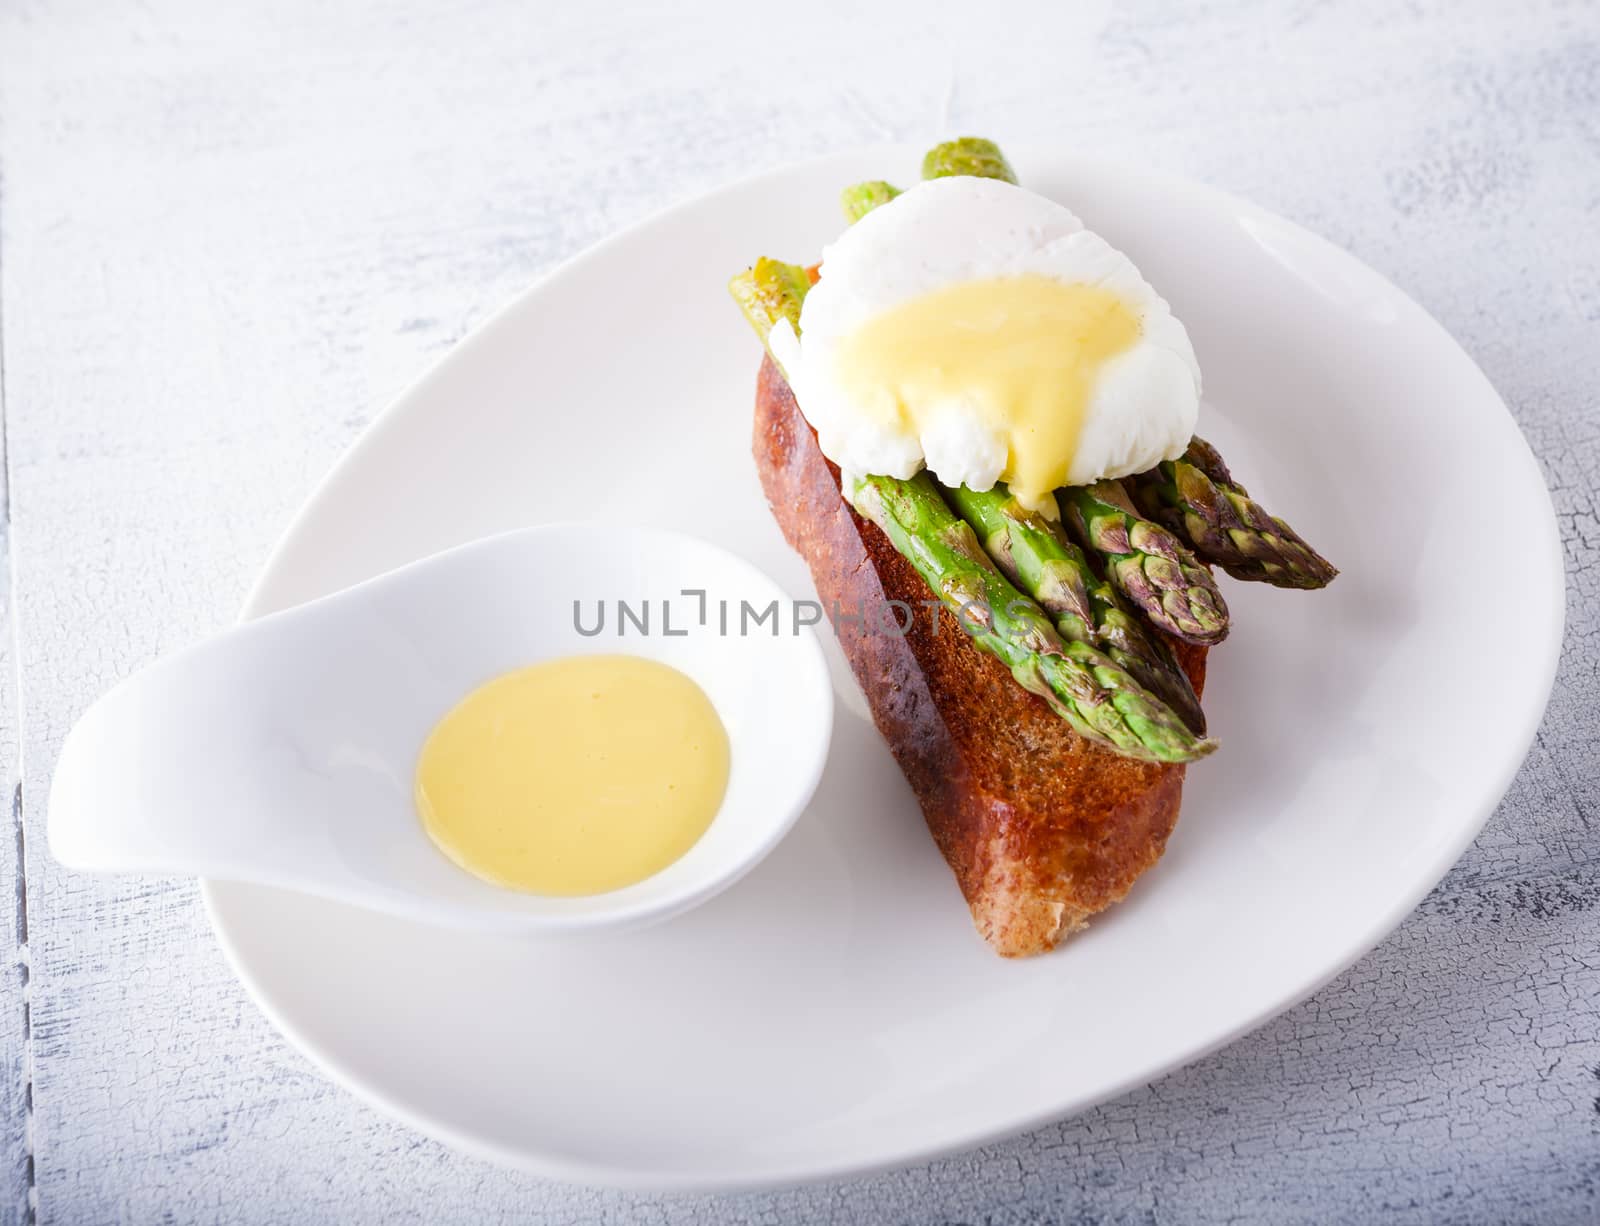 Poached egg and asparagus by supercat67